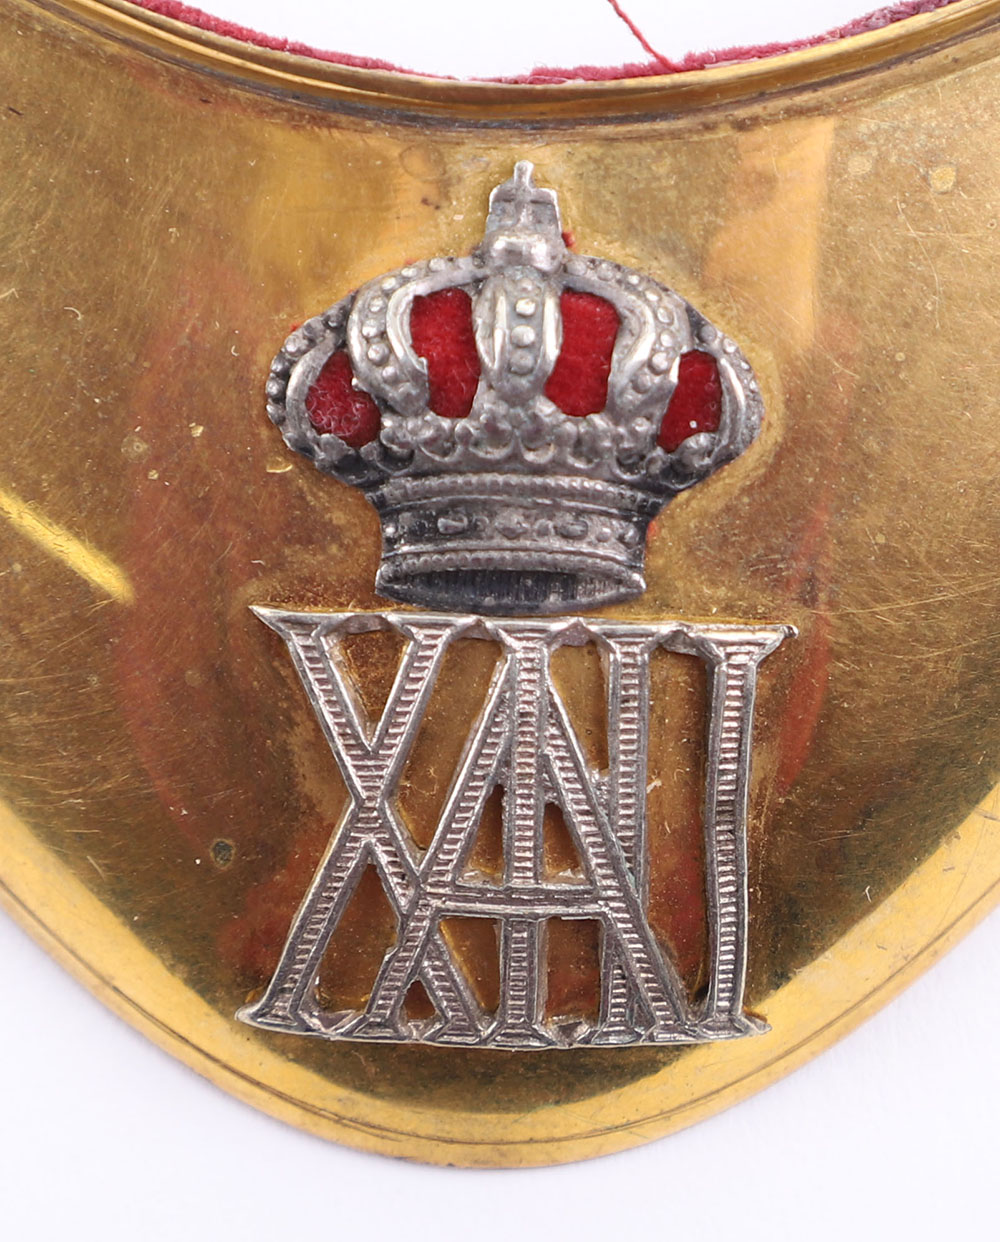 EUROPEAN OFFICERS GORGET - Image 4 of 7